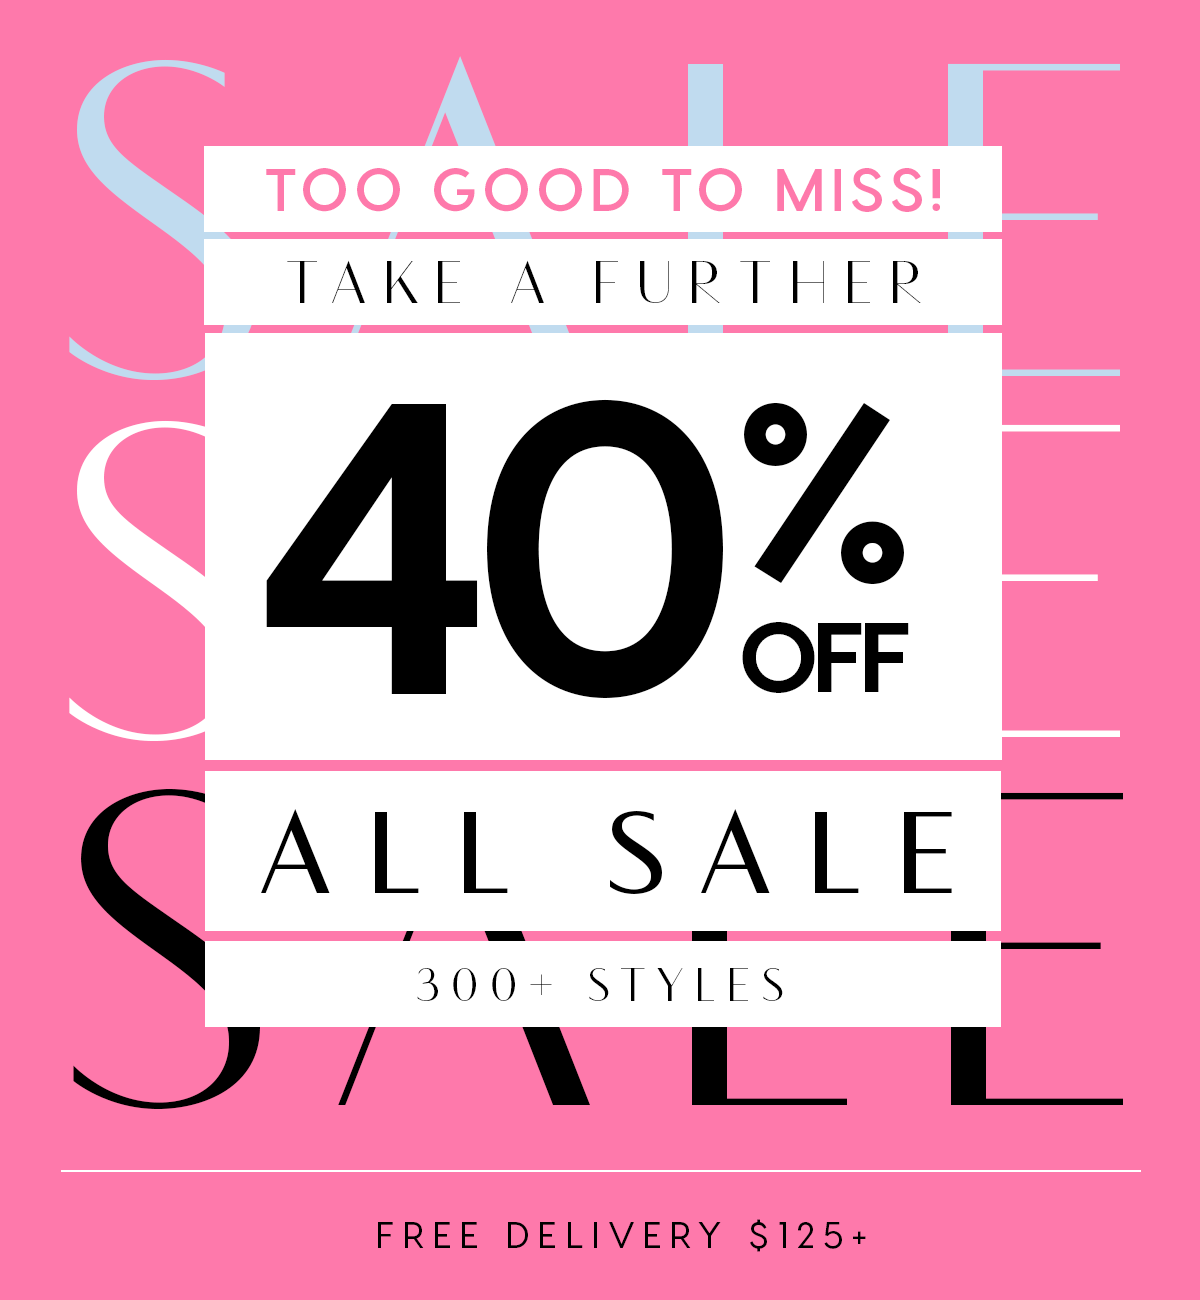 Too Good To Miss. Take A Further 40%Off All Sale 300+ Styles. Free Delivery $125+